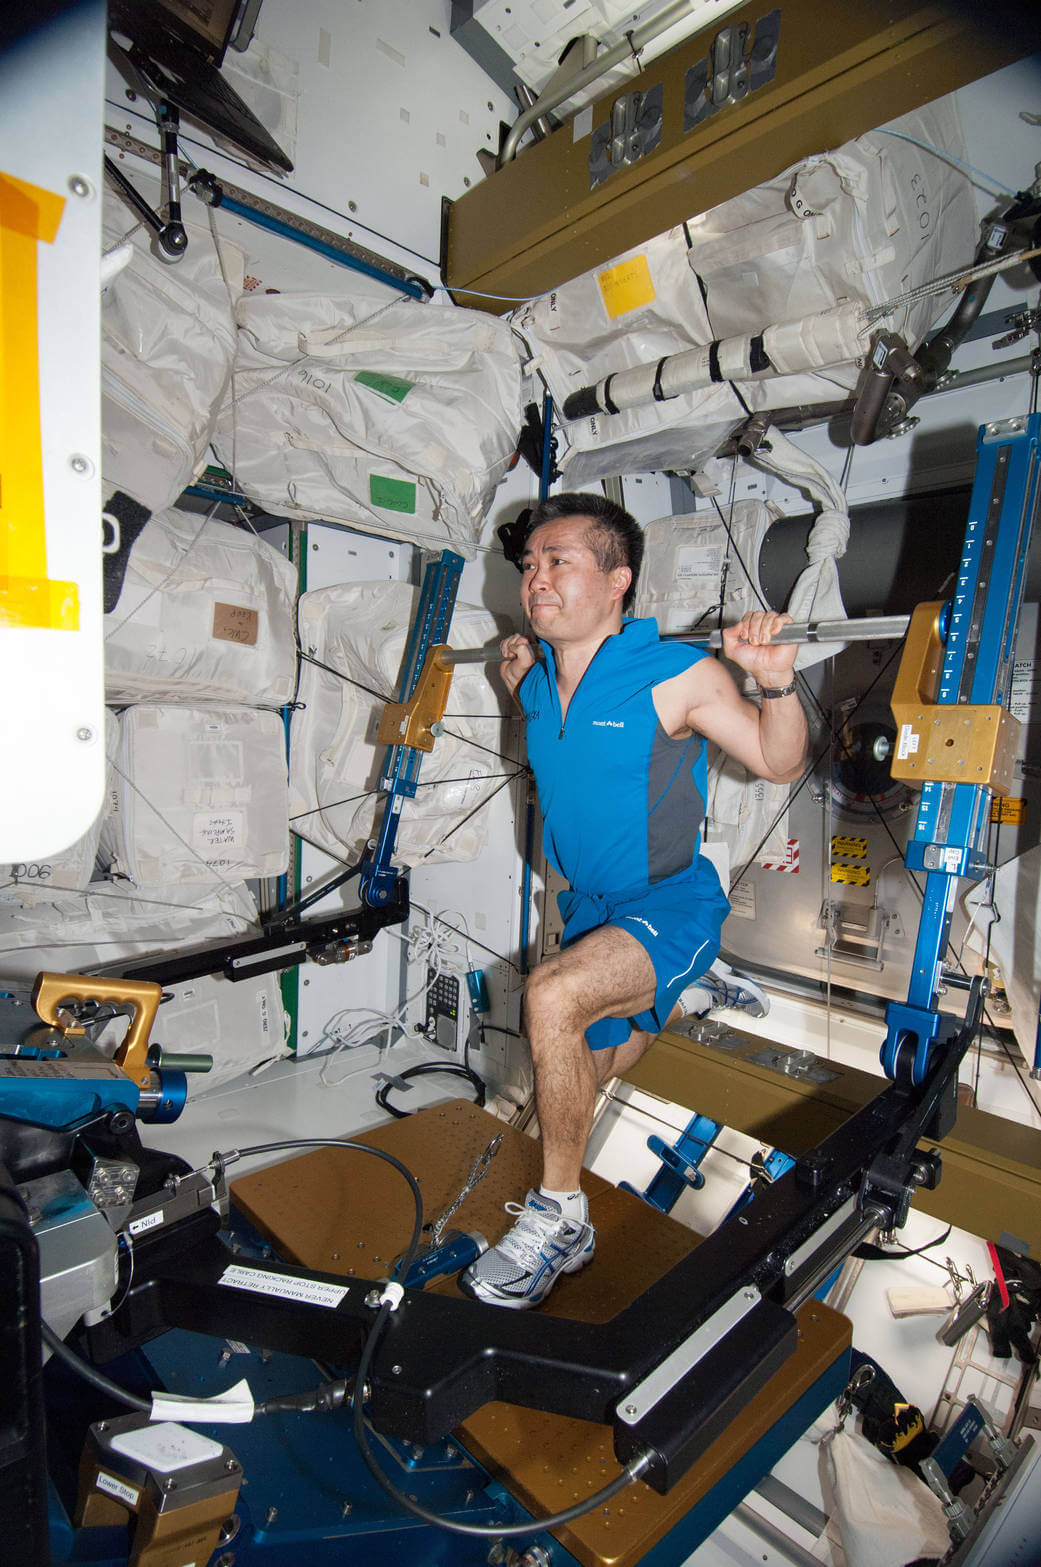 Exercise in Space